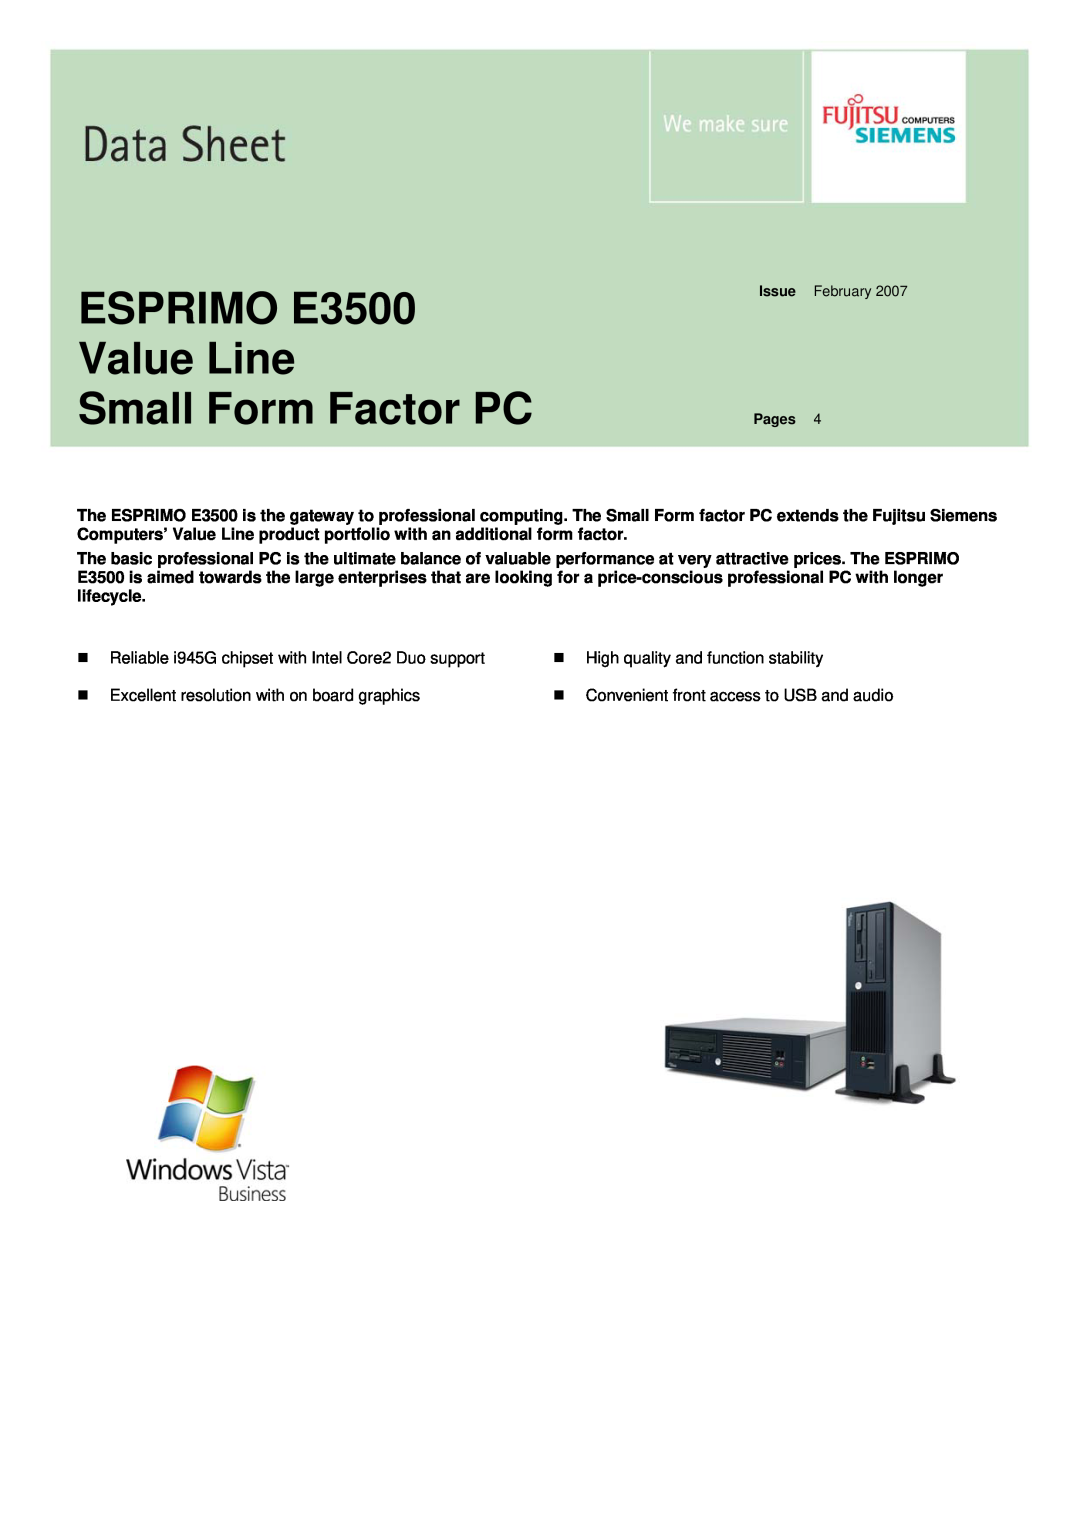 Fujitsu Siemens Computers manual ESPRIMO E3500 Value Line Small Form Factor PC, High quality and function stability 